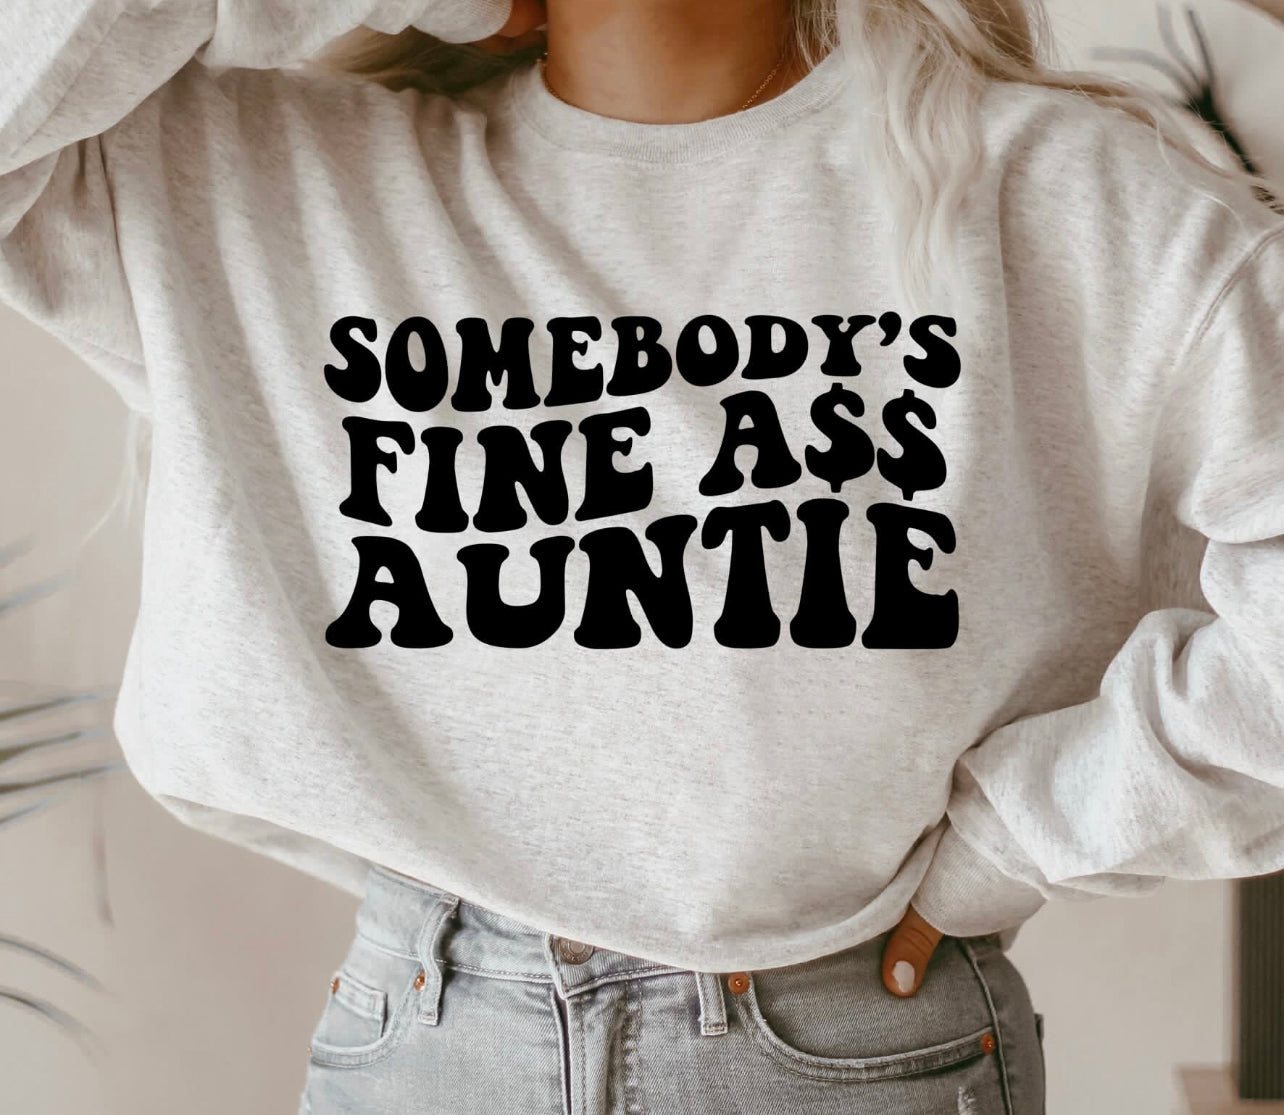 Fine A$$ Auntie